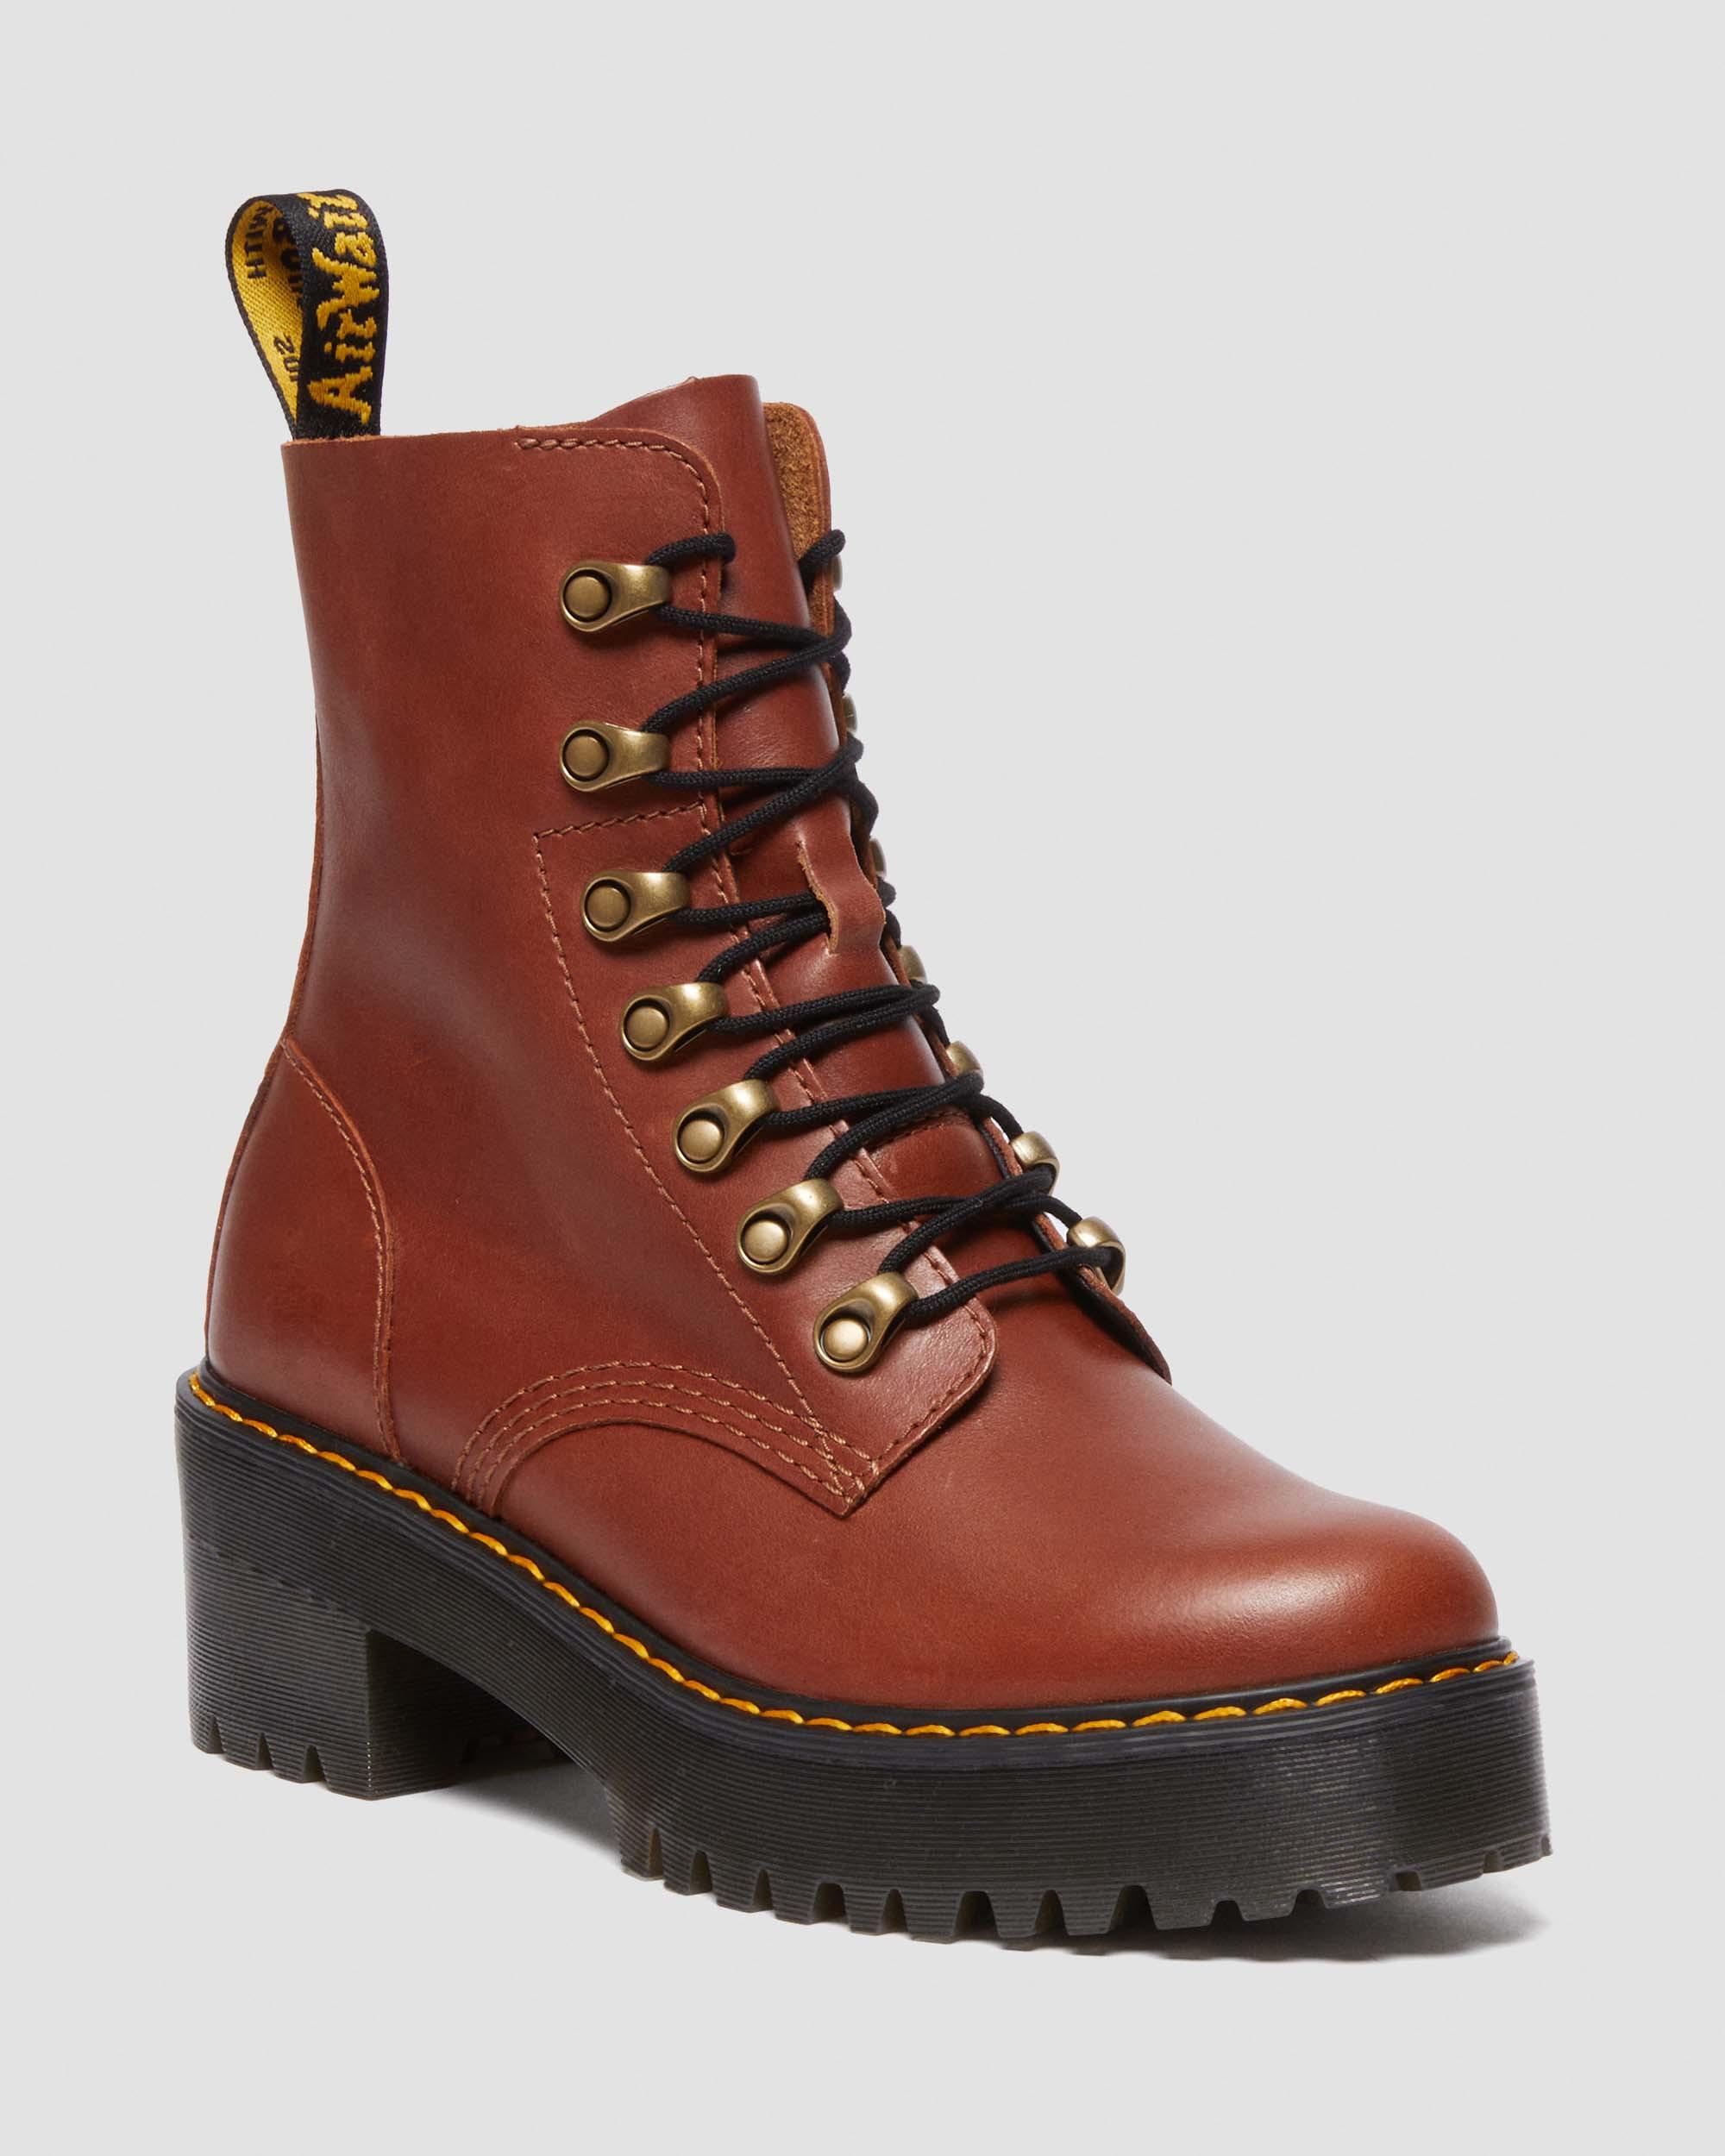 DR MARTENS Leona Women's Farrier Leather Heeled Boots